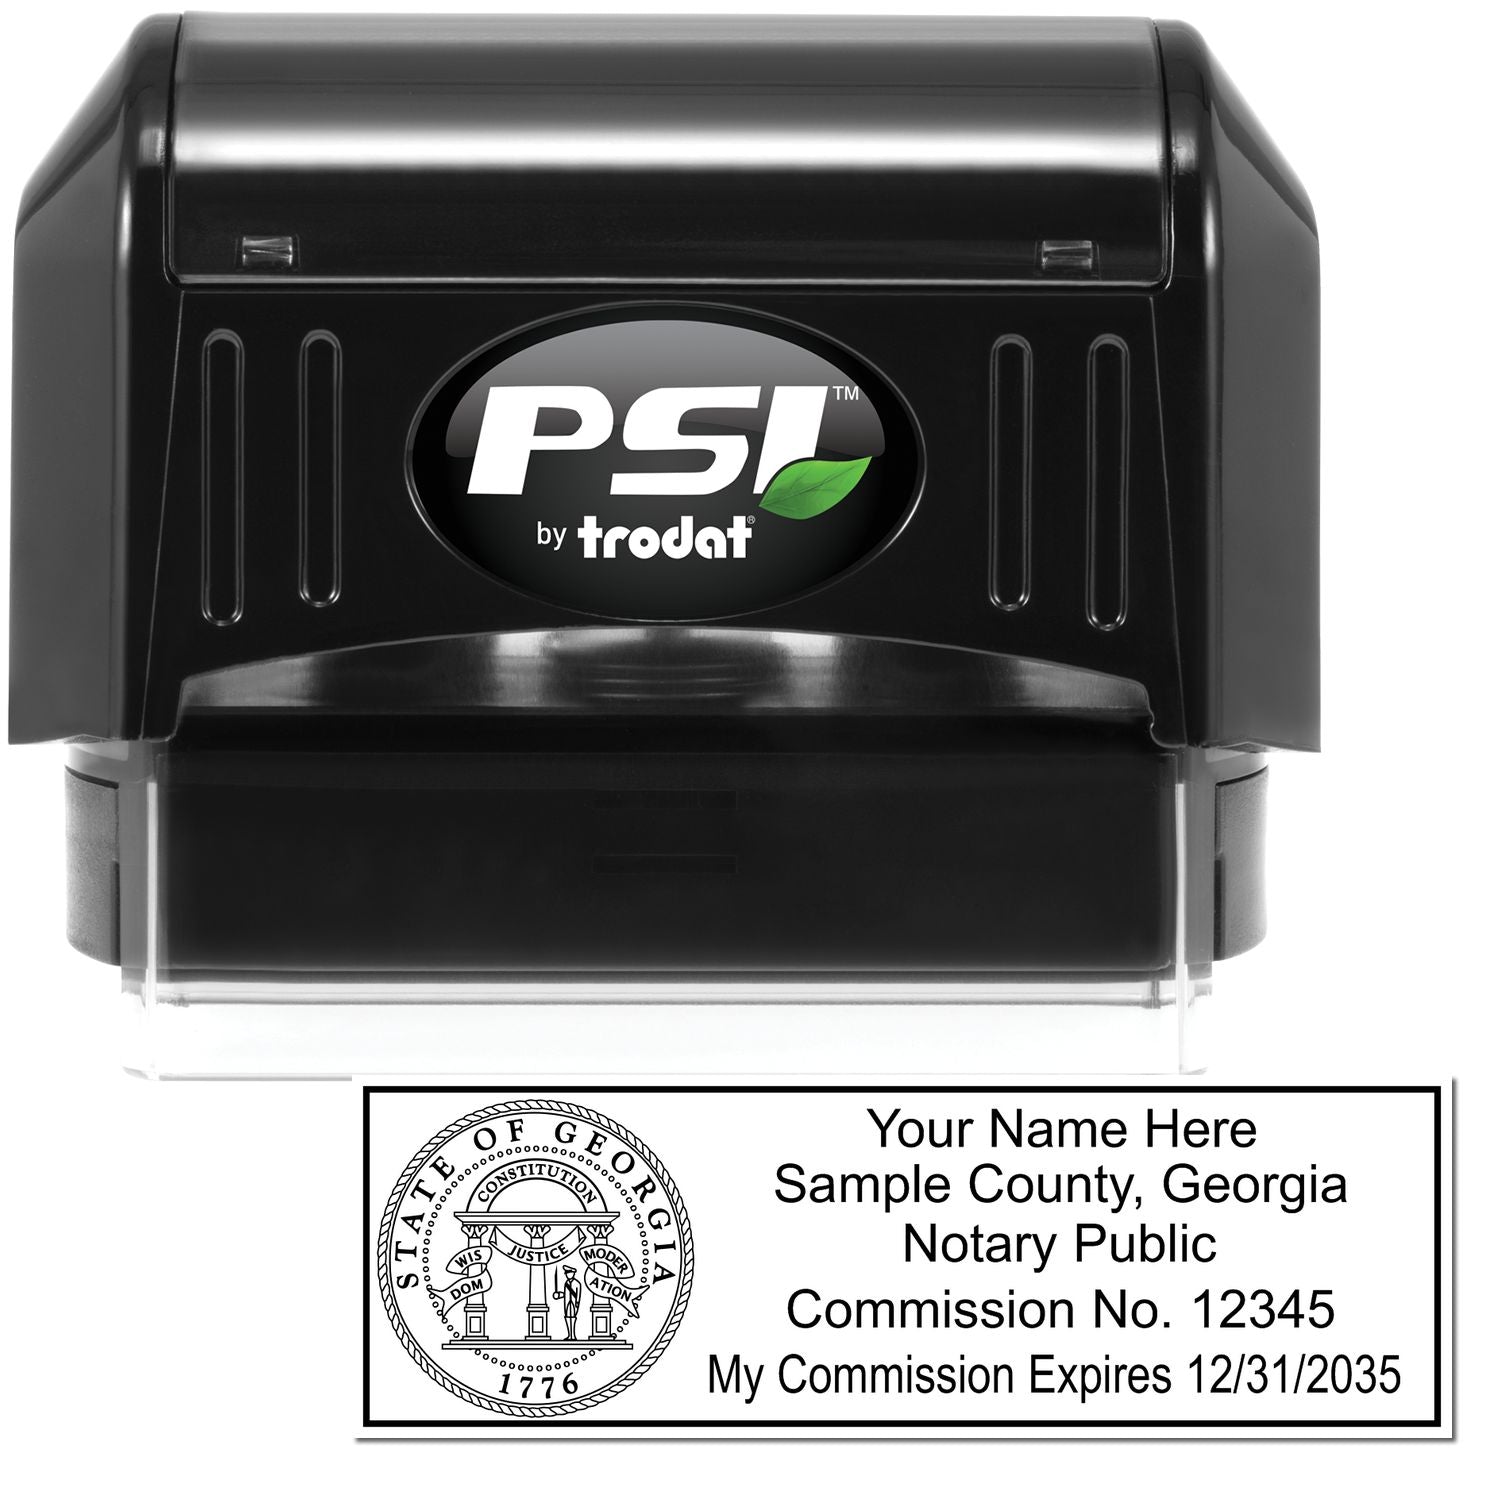 The main image for the PSI Georgia Notary Stamp depicting a sample of the imprint and electronic files